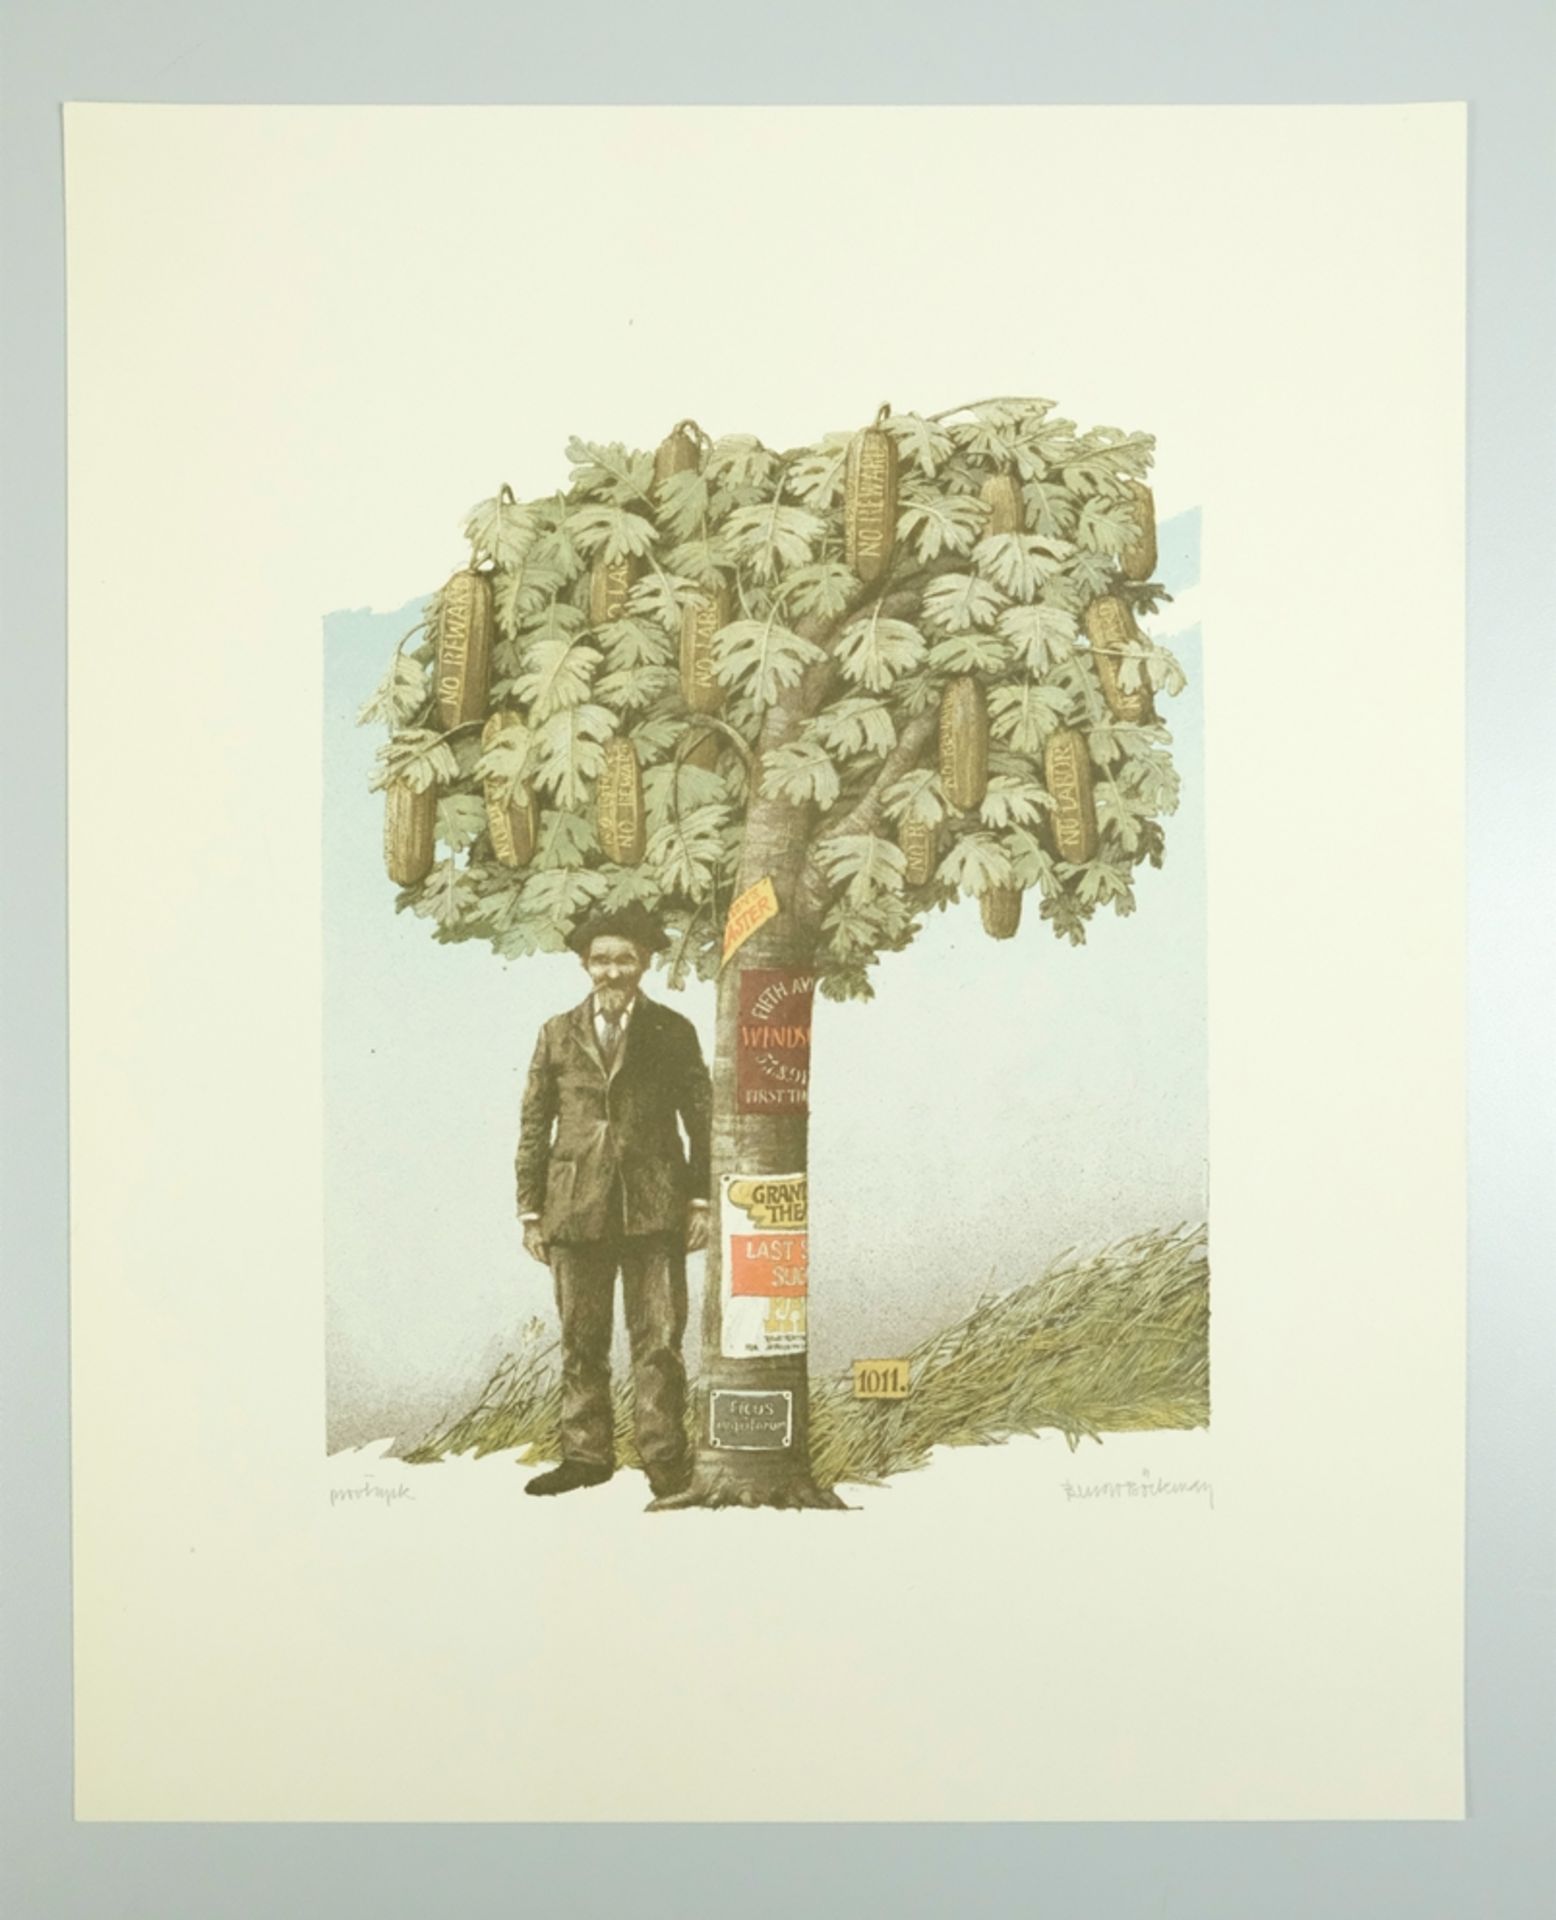 Böckmann, Bengt (born 1937) "Untitled", fig tree with sign "ficus nigritarum", the fruits are long, - Image 2 of 5